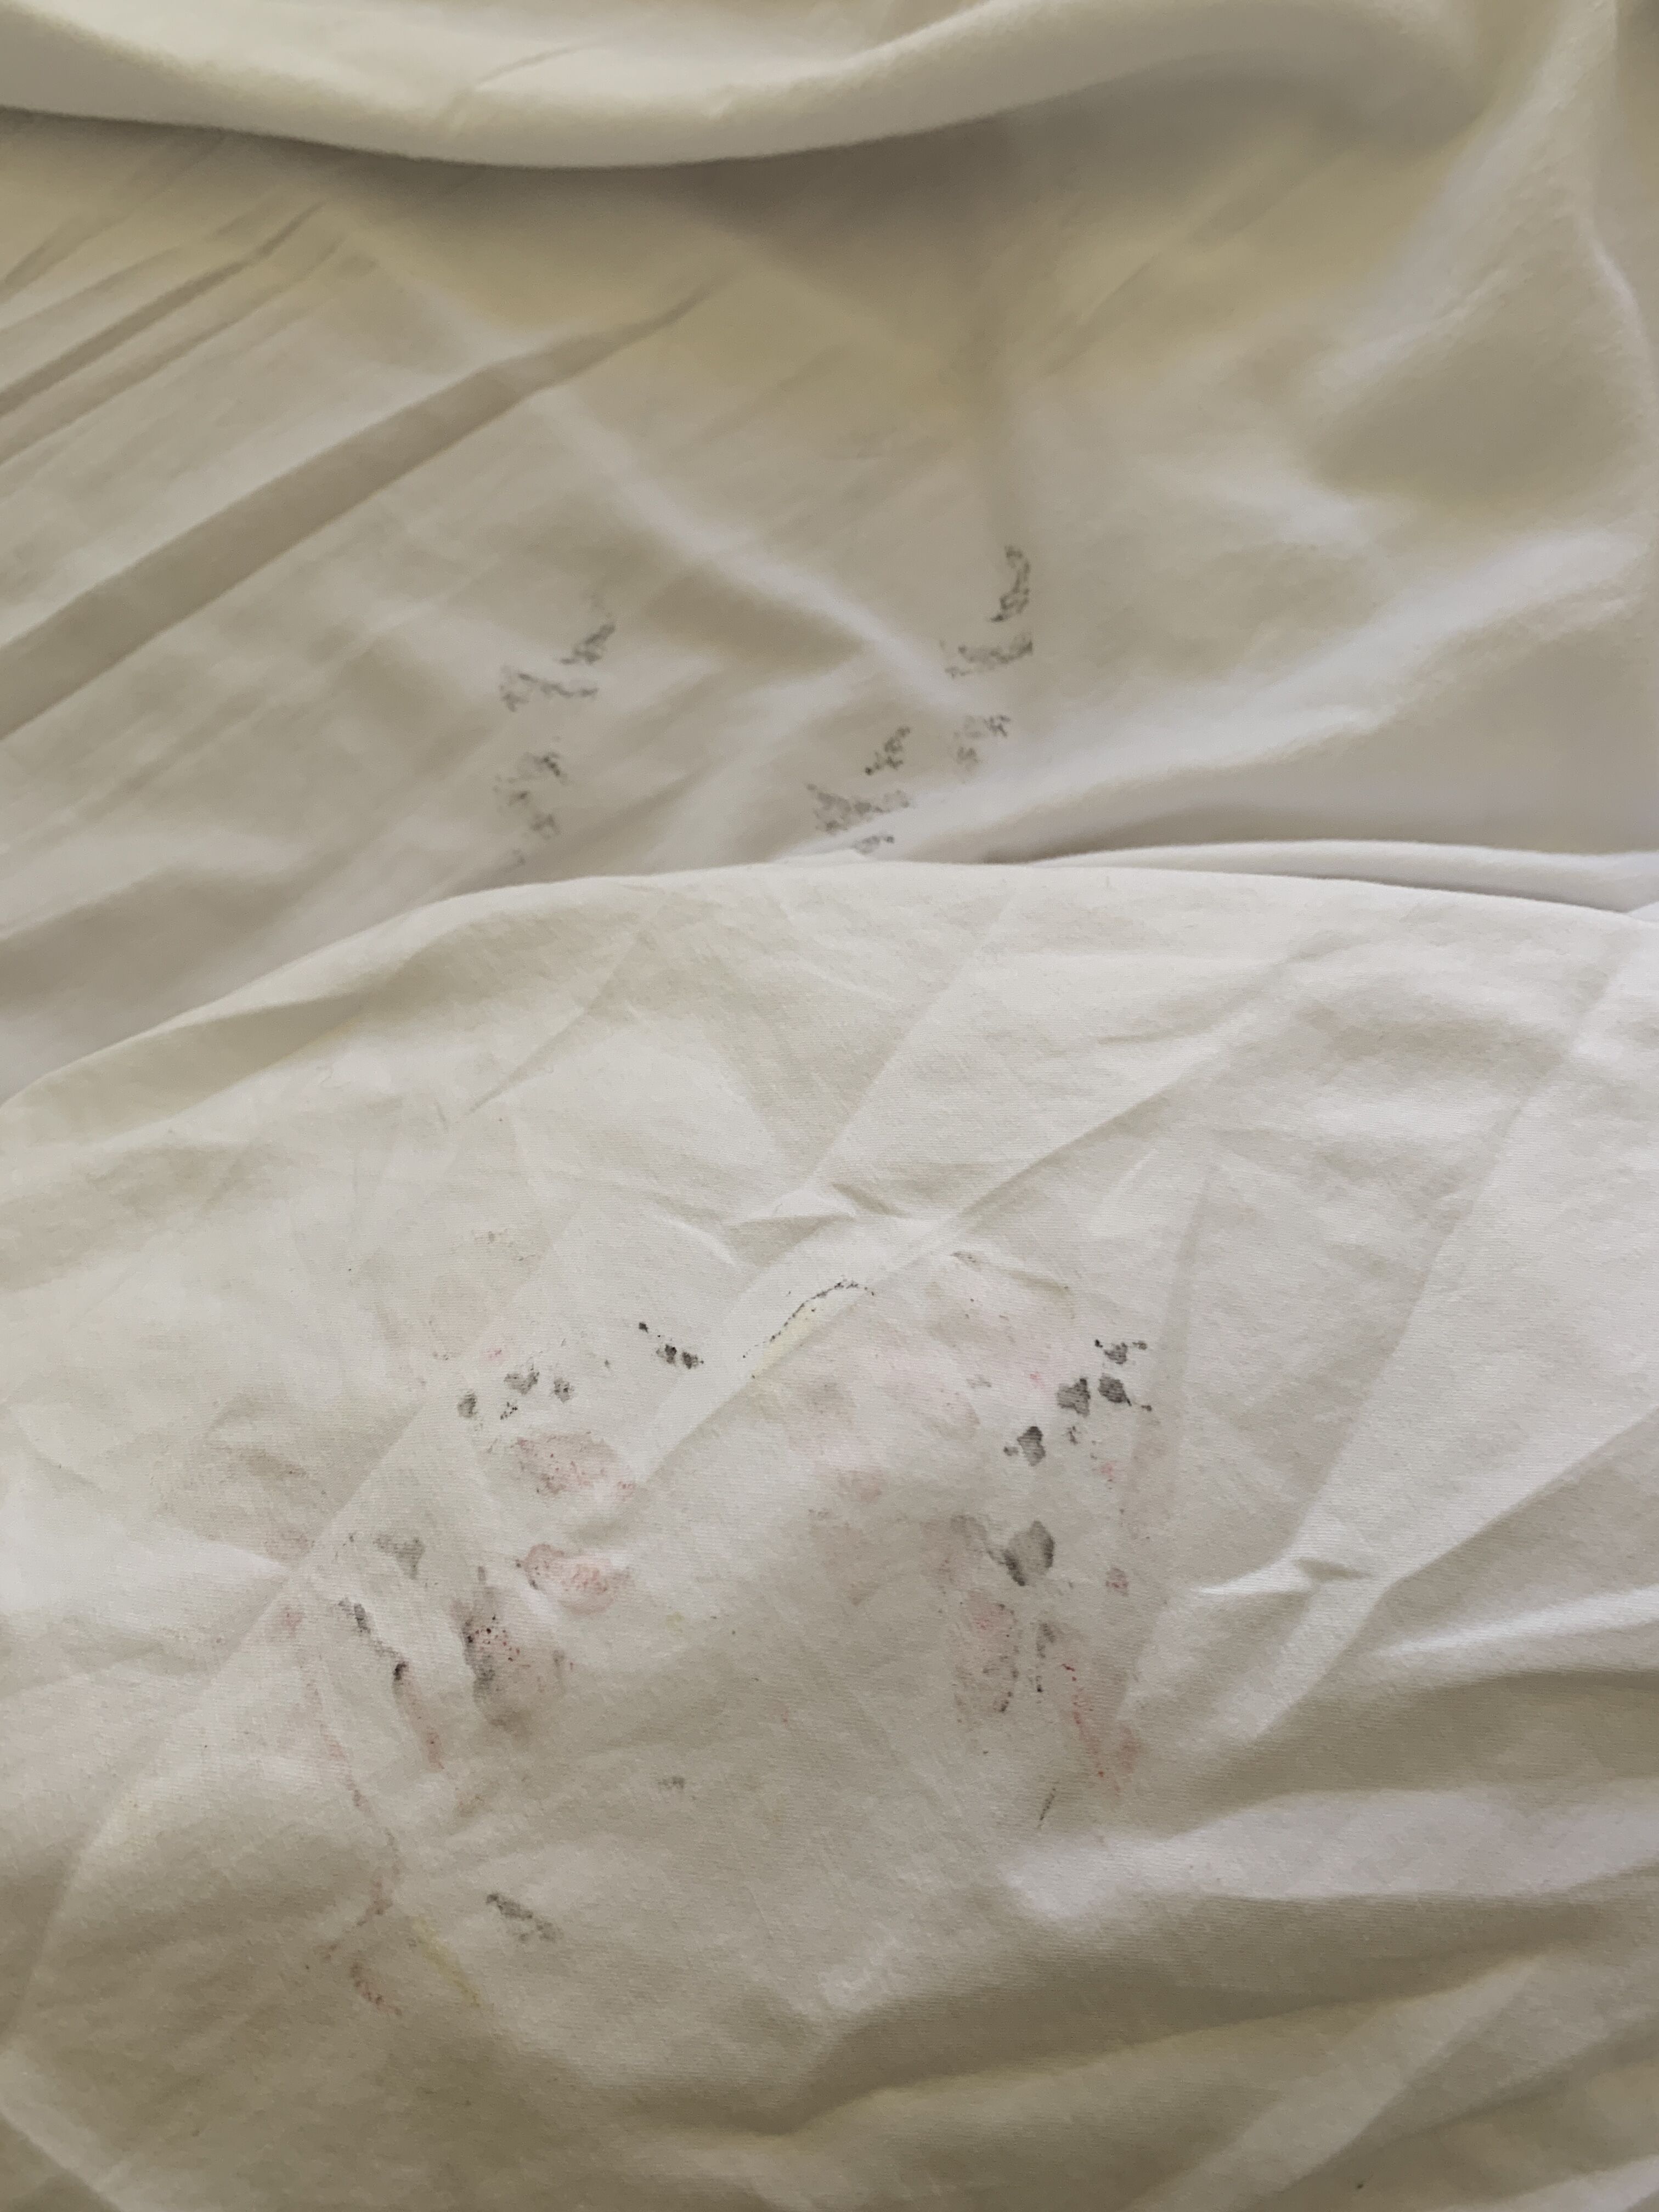 How to get tattoo ink out of bed sheets